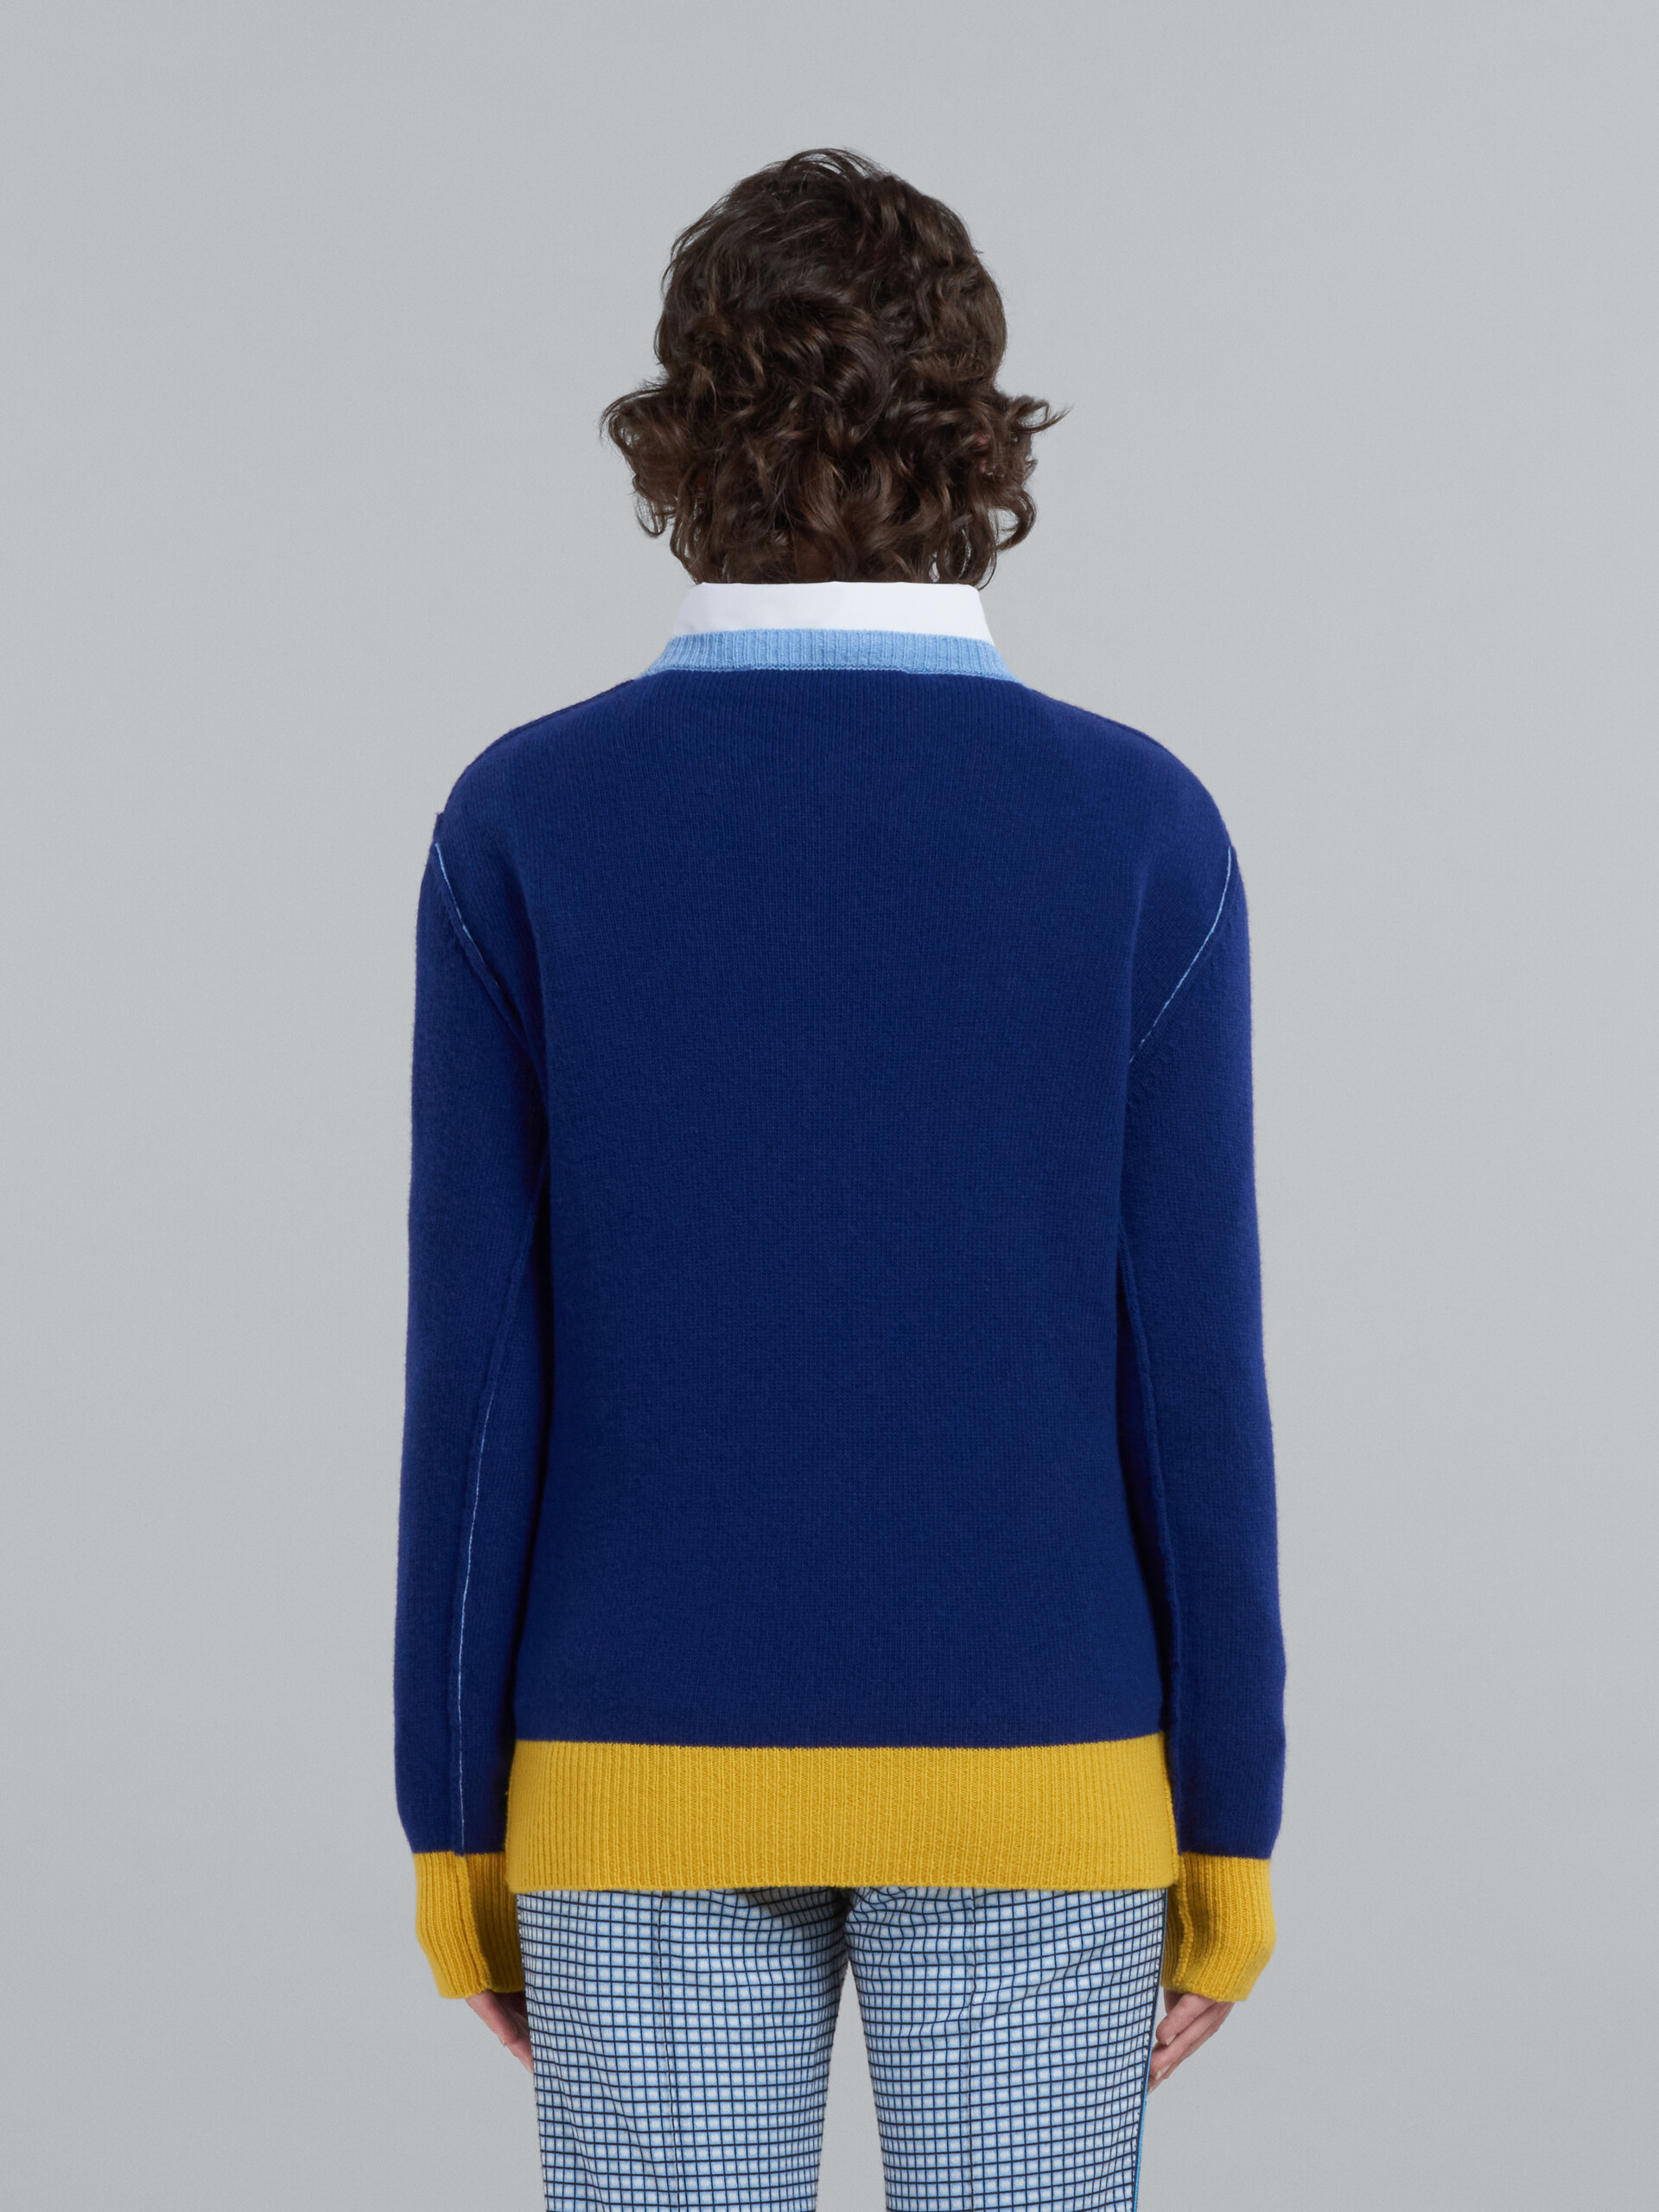 Blue wool sweater with logo - Pullovers - Image 3